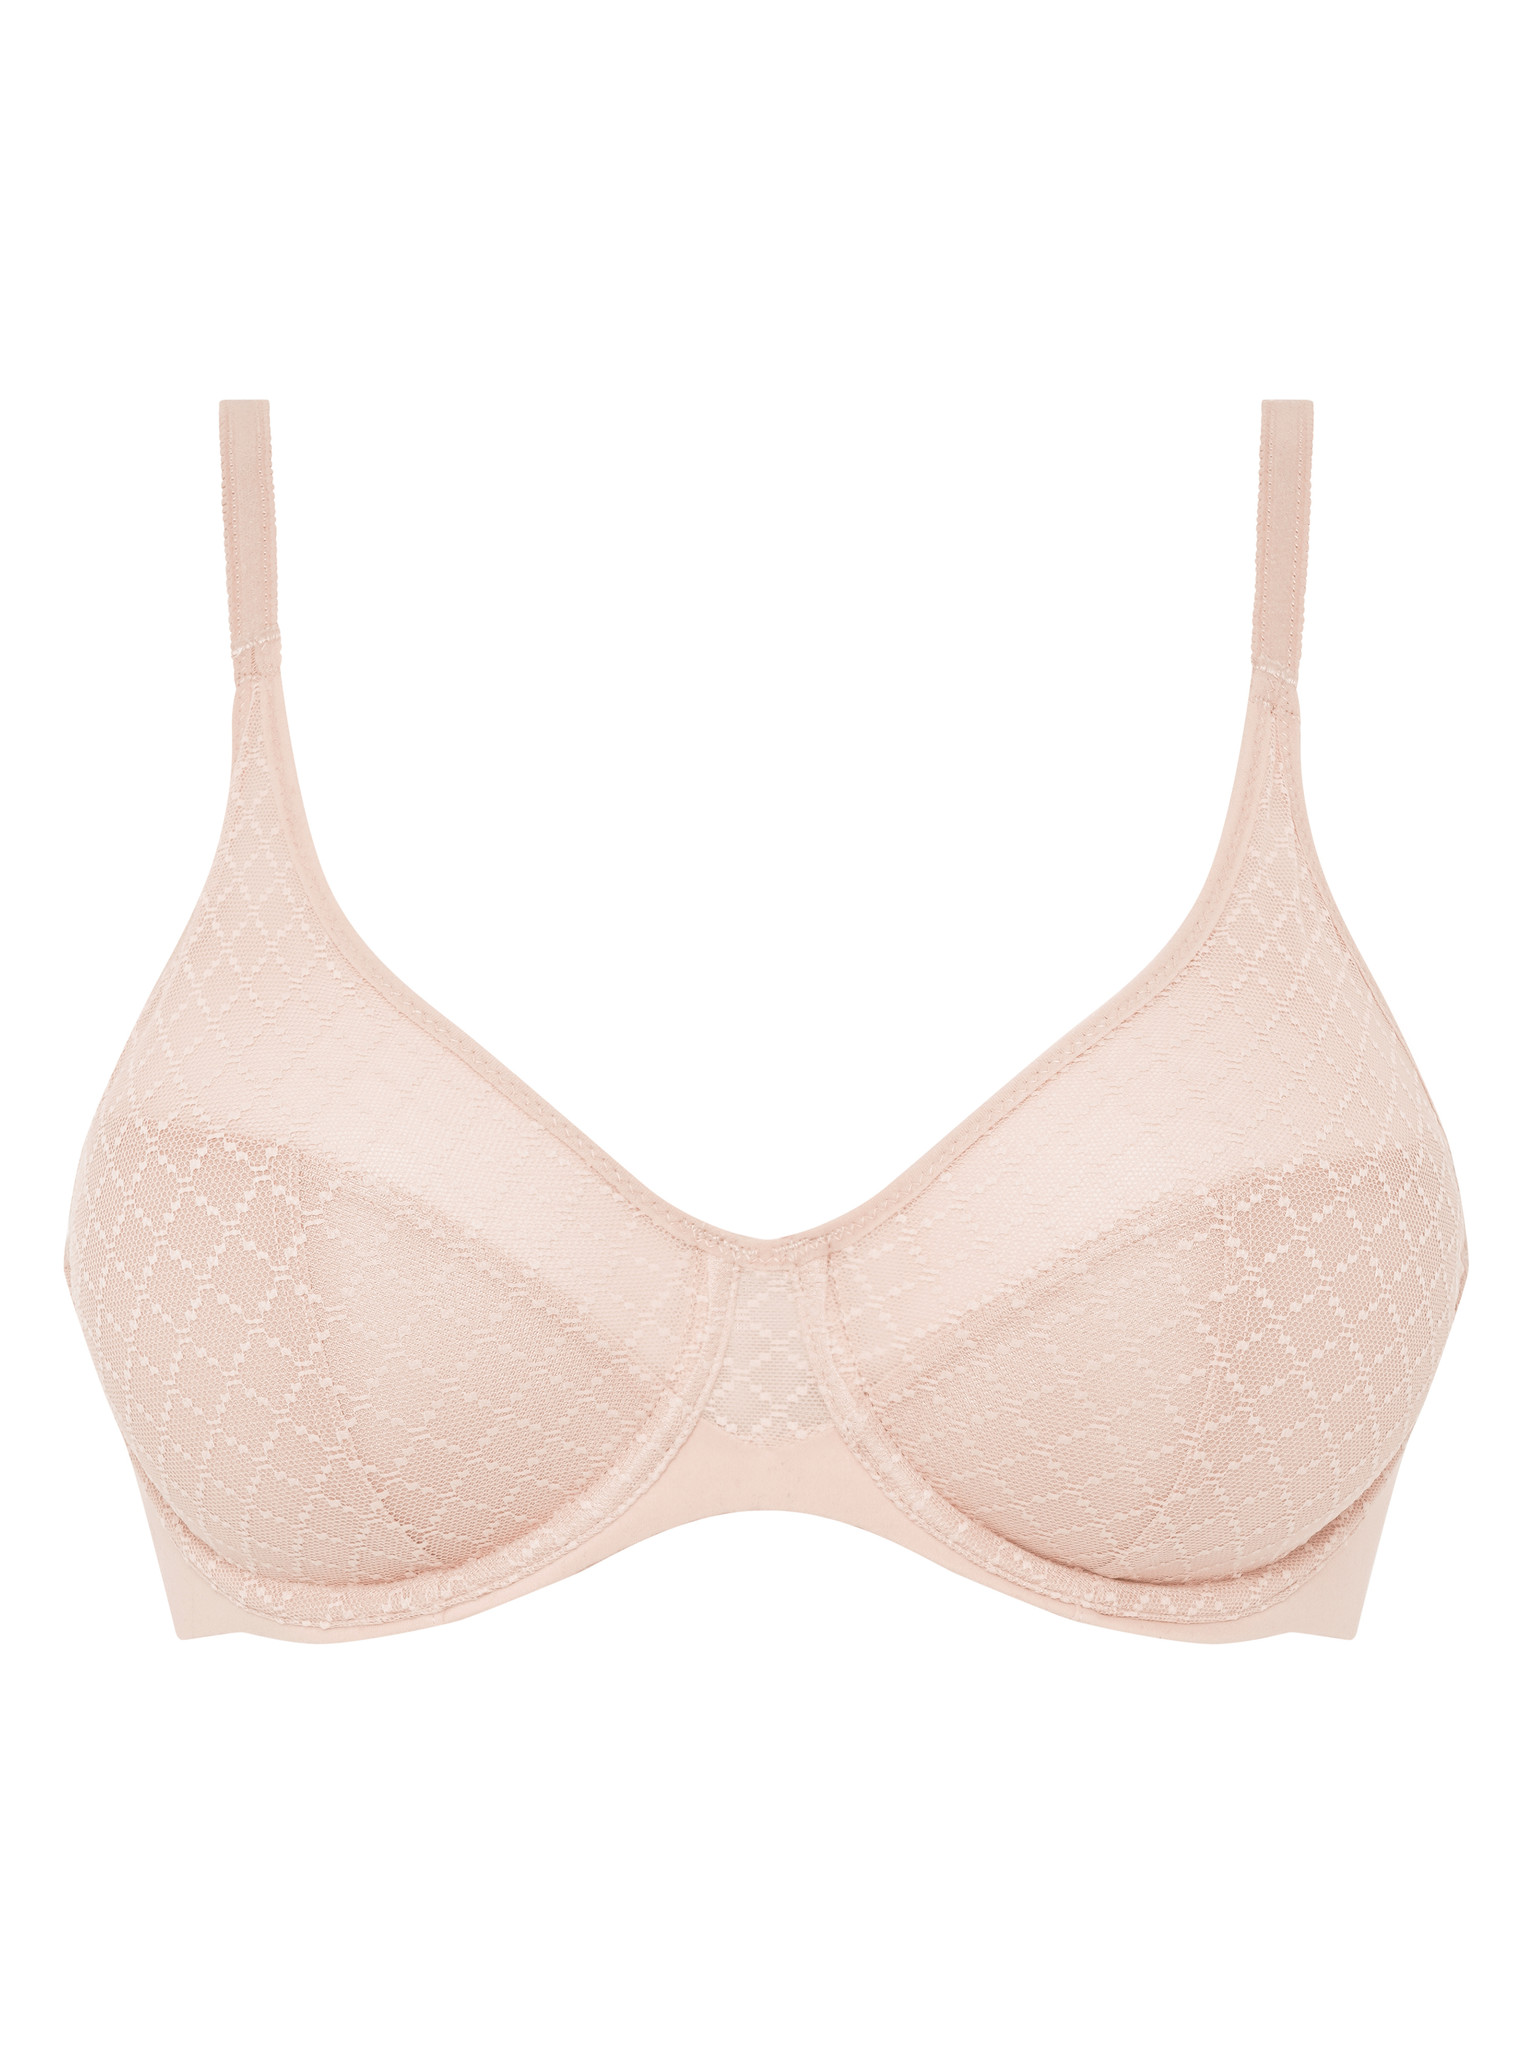 Chantelle Norah Chic Molded Underwire